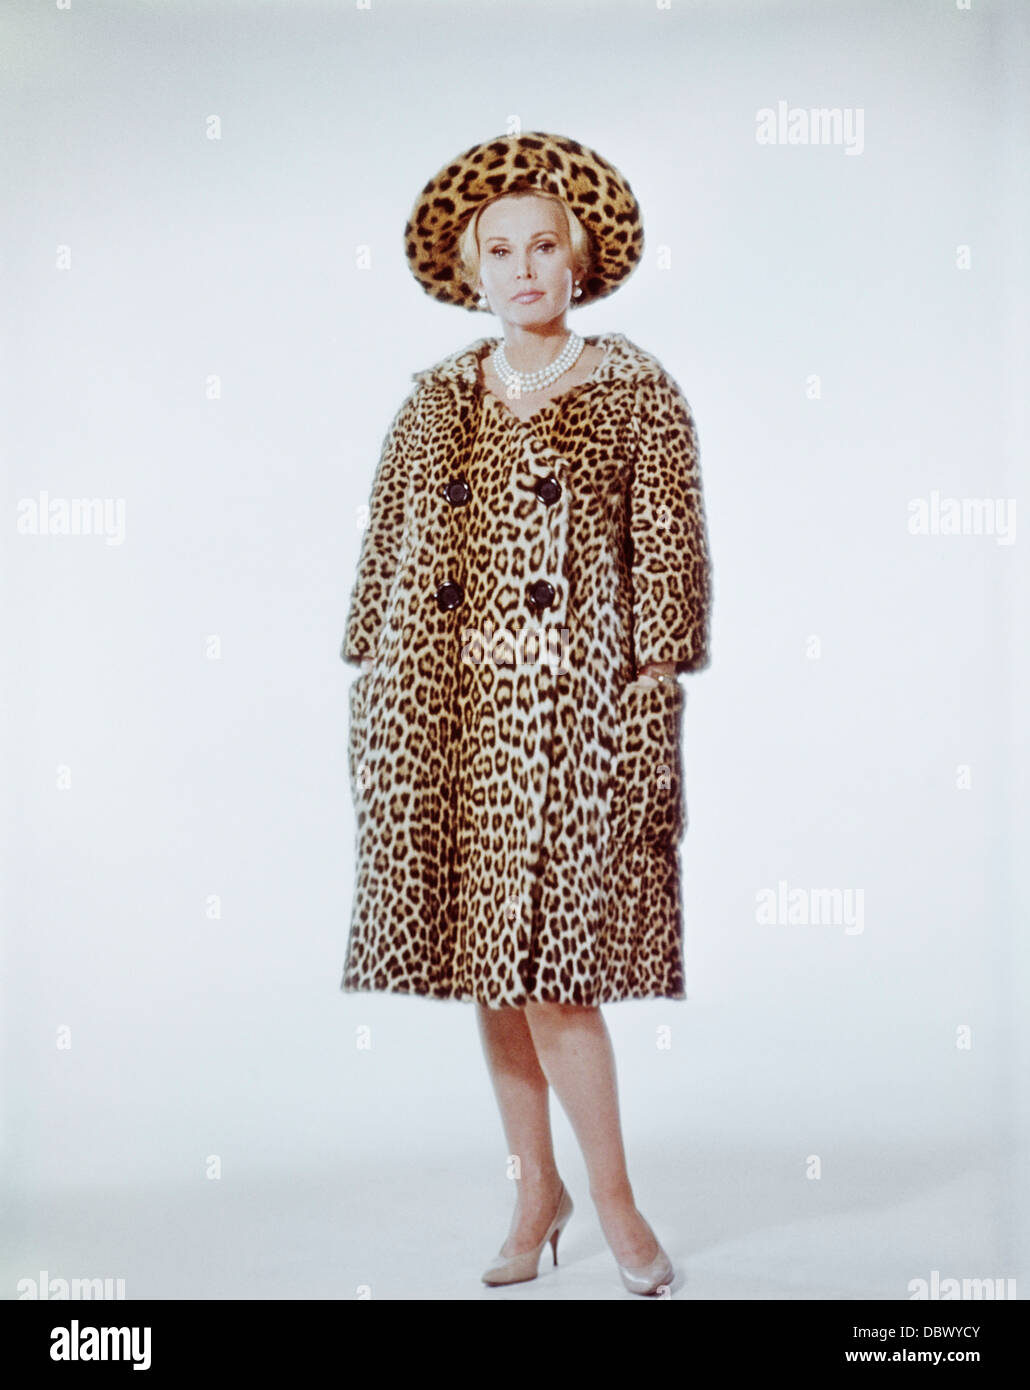 1960s ACTRESS ZSA ZSA GABOR WEARING HIGH FASHION  LEOPARD SKIN HAT AND COAT LOOKING AT CAMERA Stock Photo